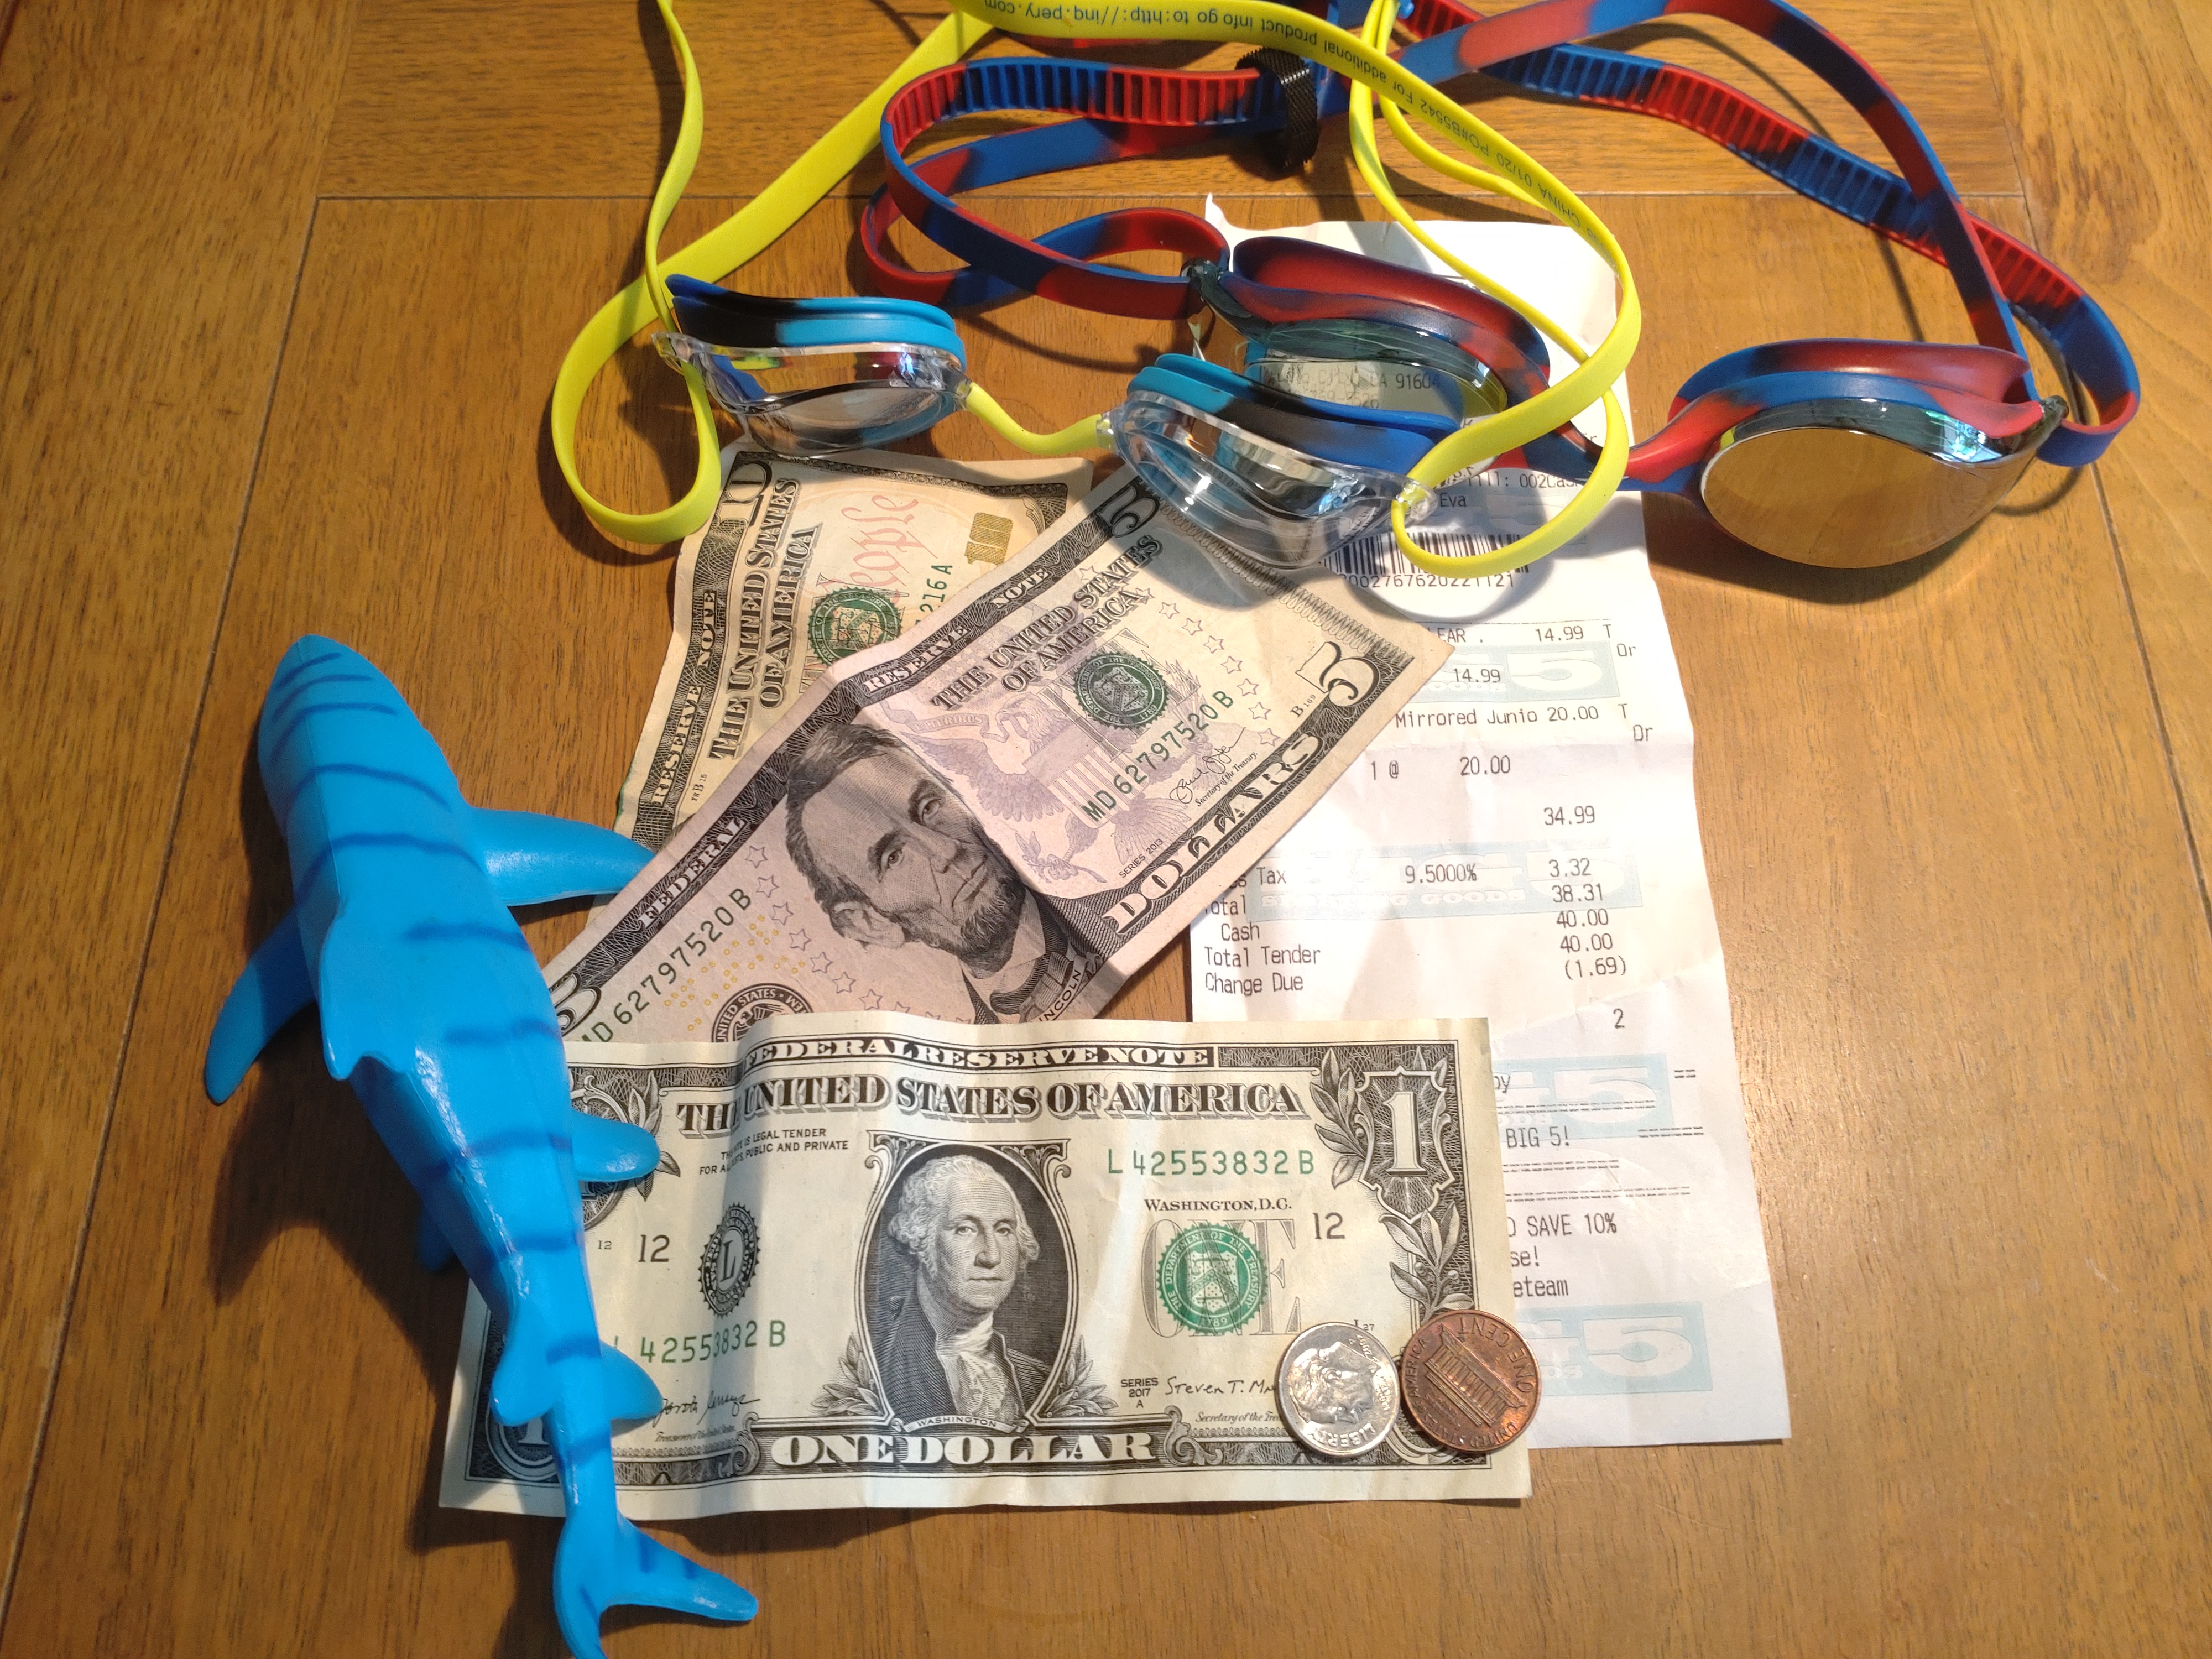 Toy shark, sixteen dollars in cash, two pairs of kids goggles and a receipt.